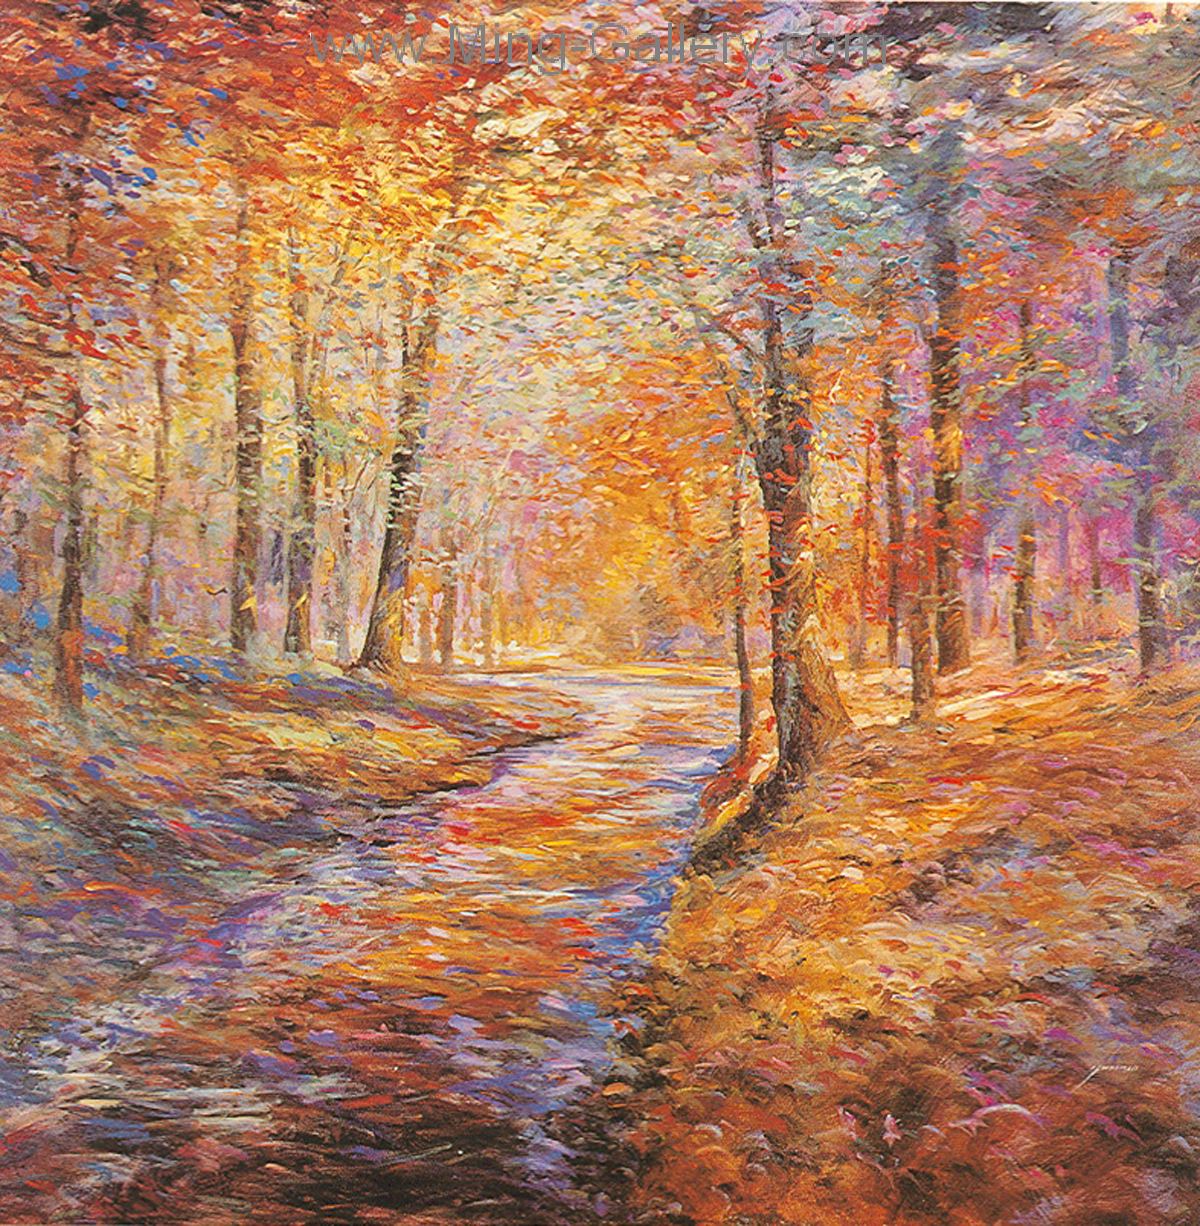 Forests painting on canvas FOR0008